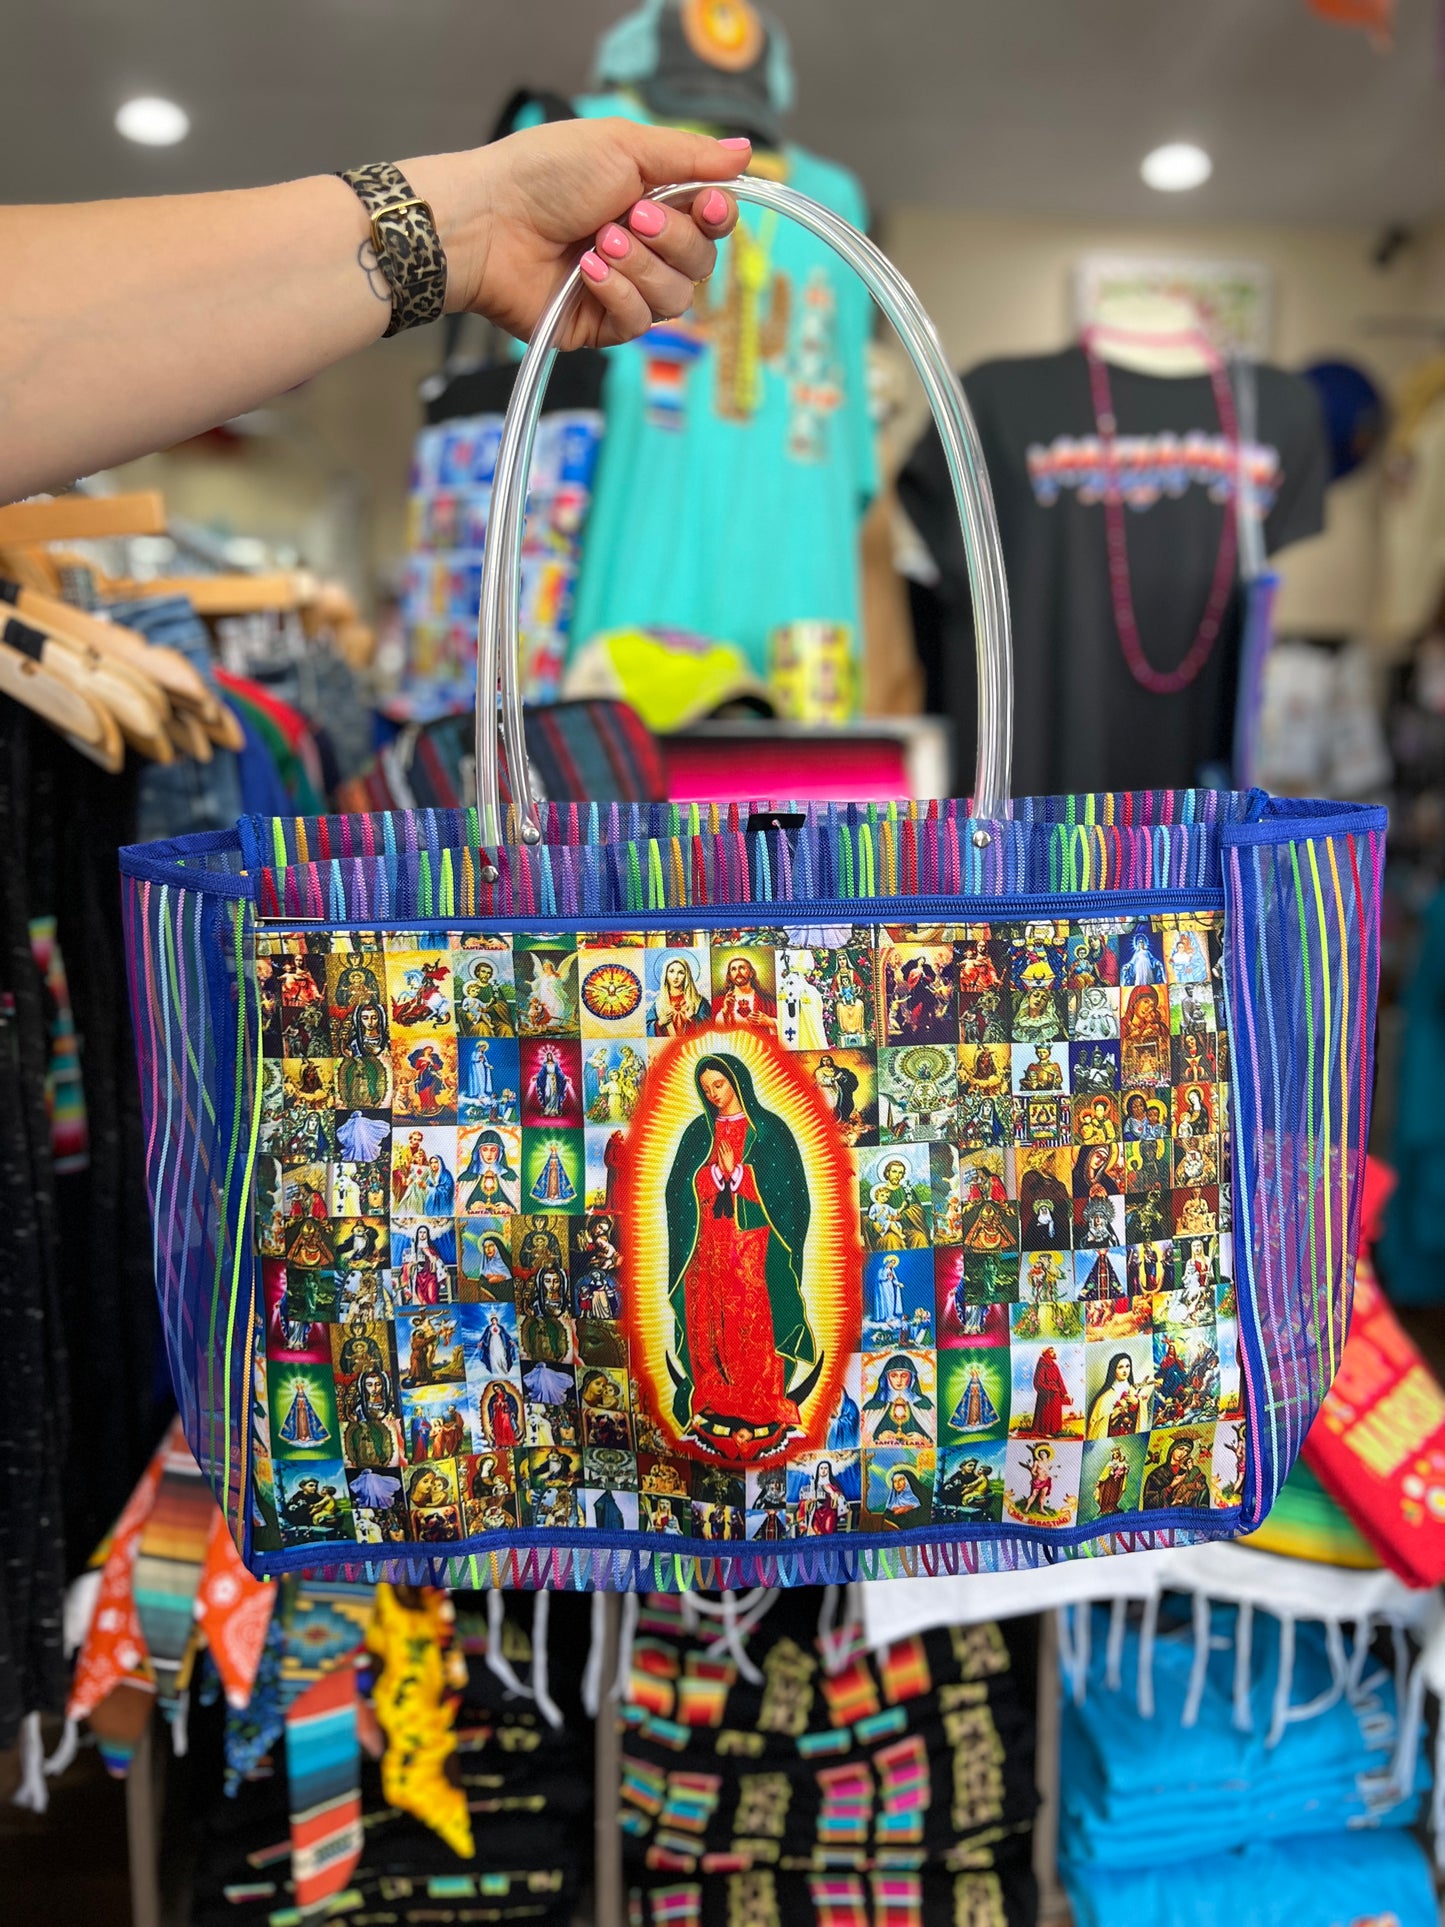 Our Lady of Guadalupe Mesh Tote Bag